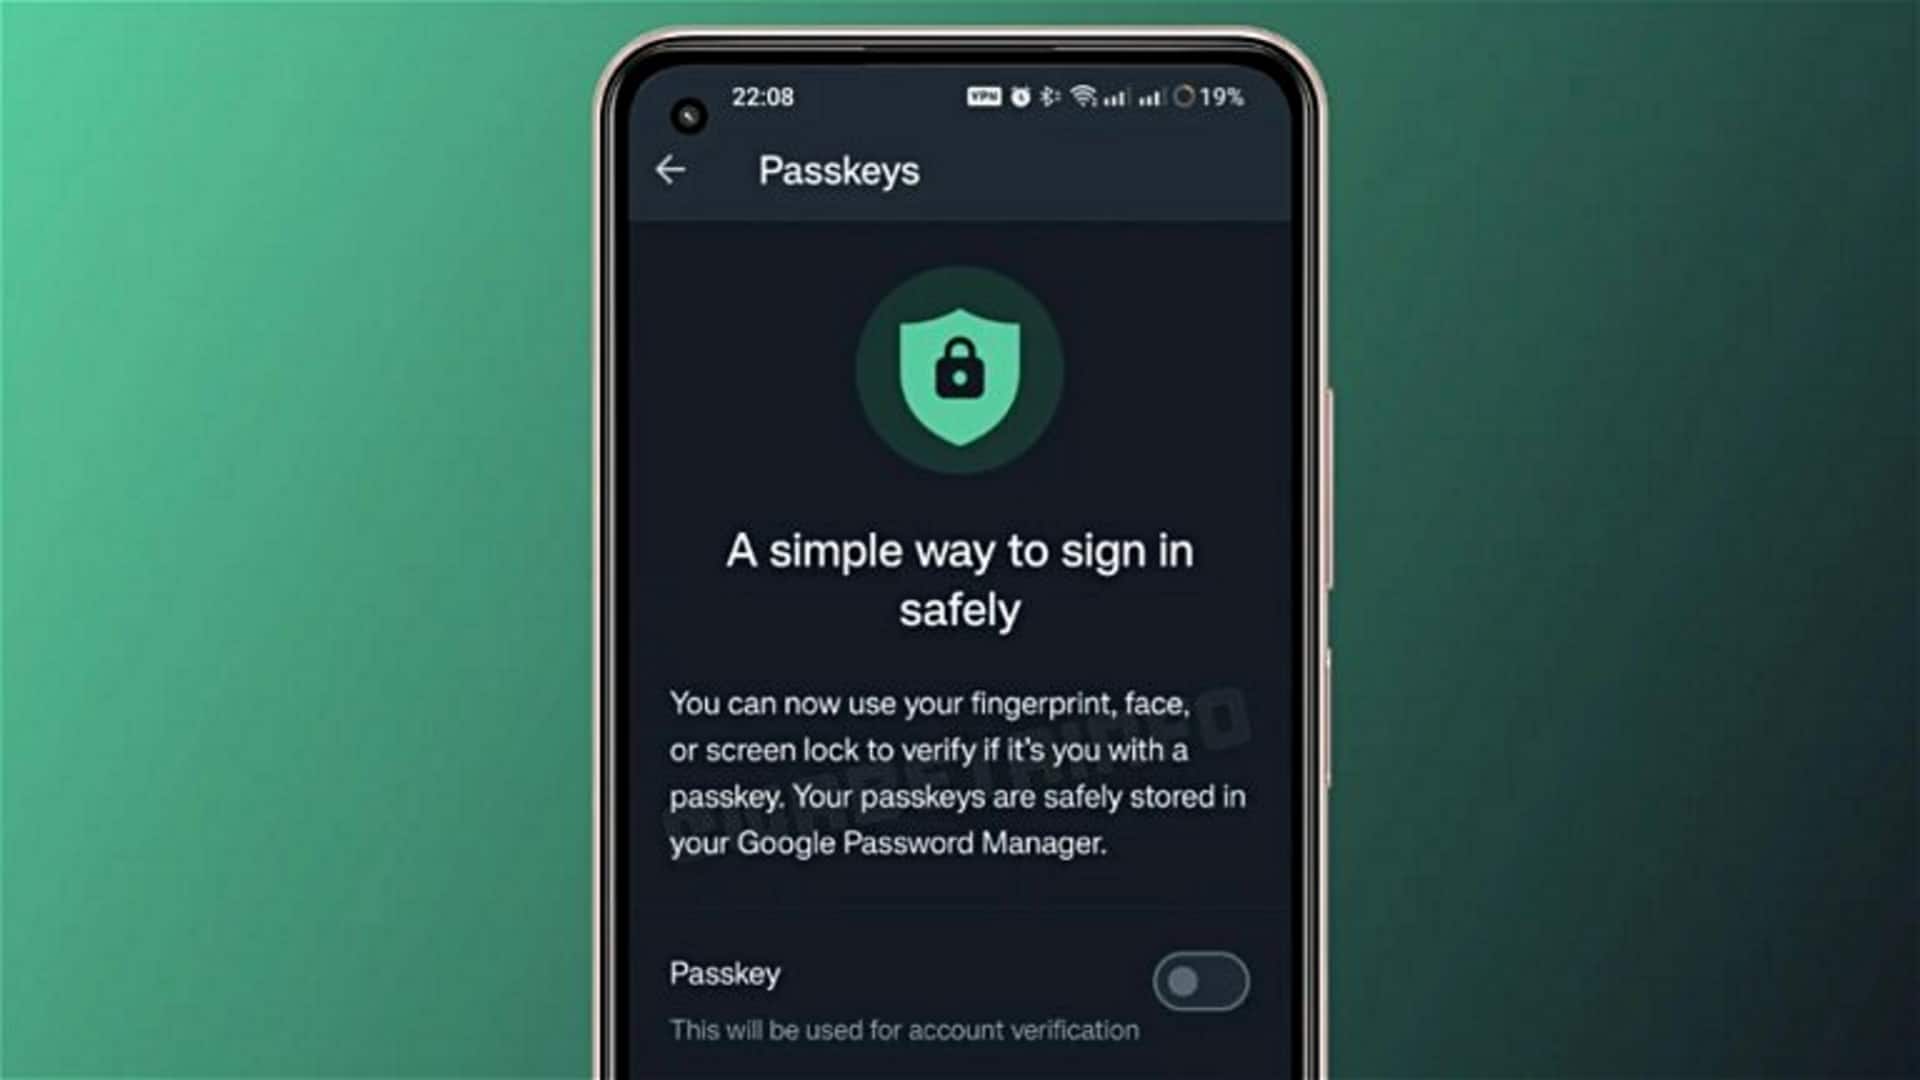 WhatsApp introduces passkey feature for iOS beta testers